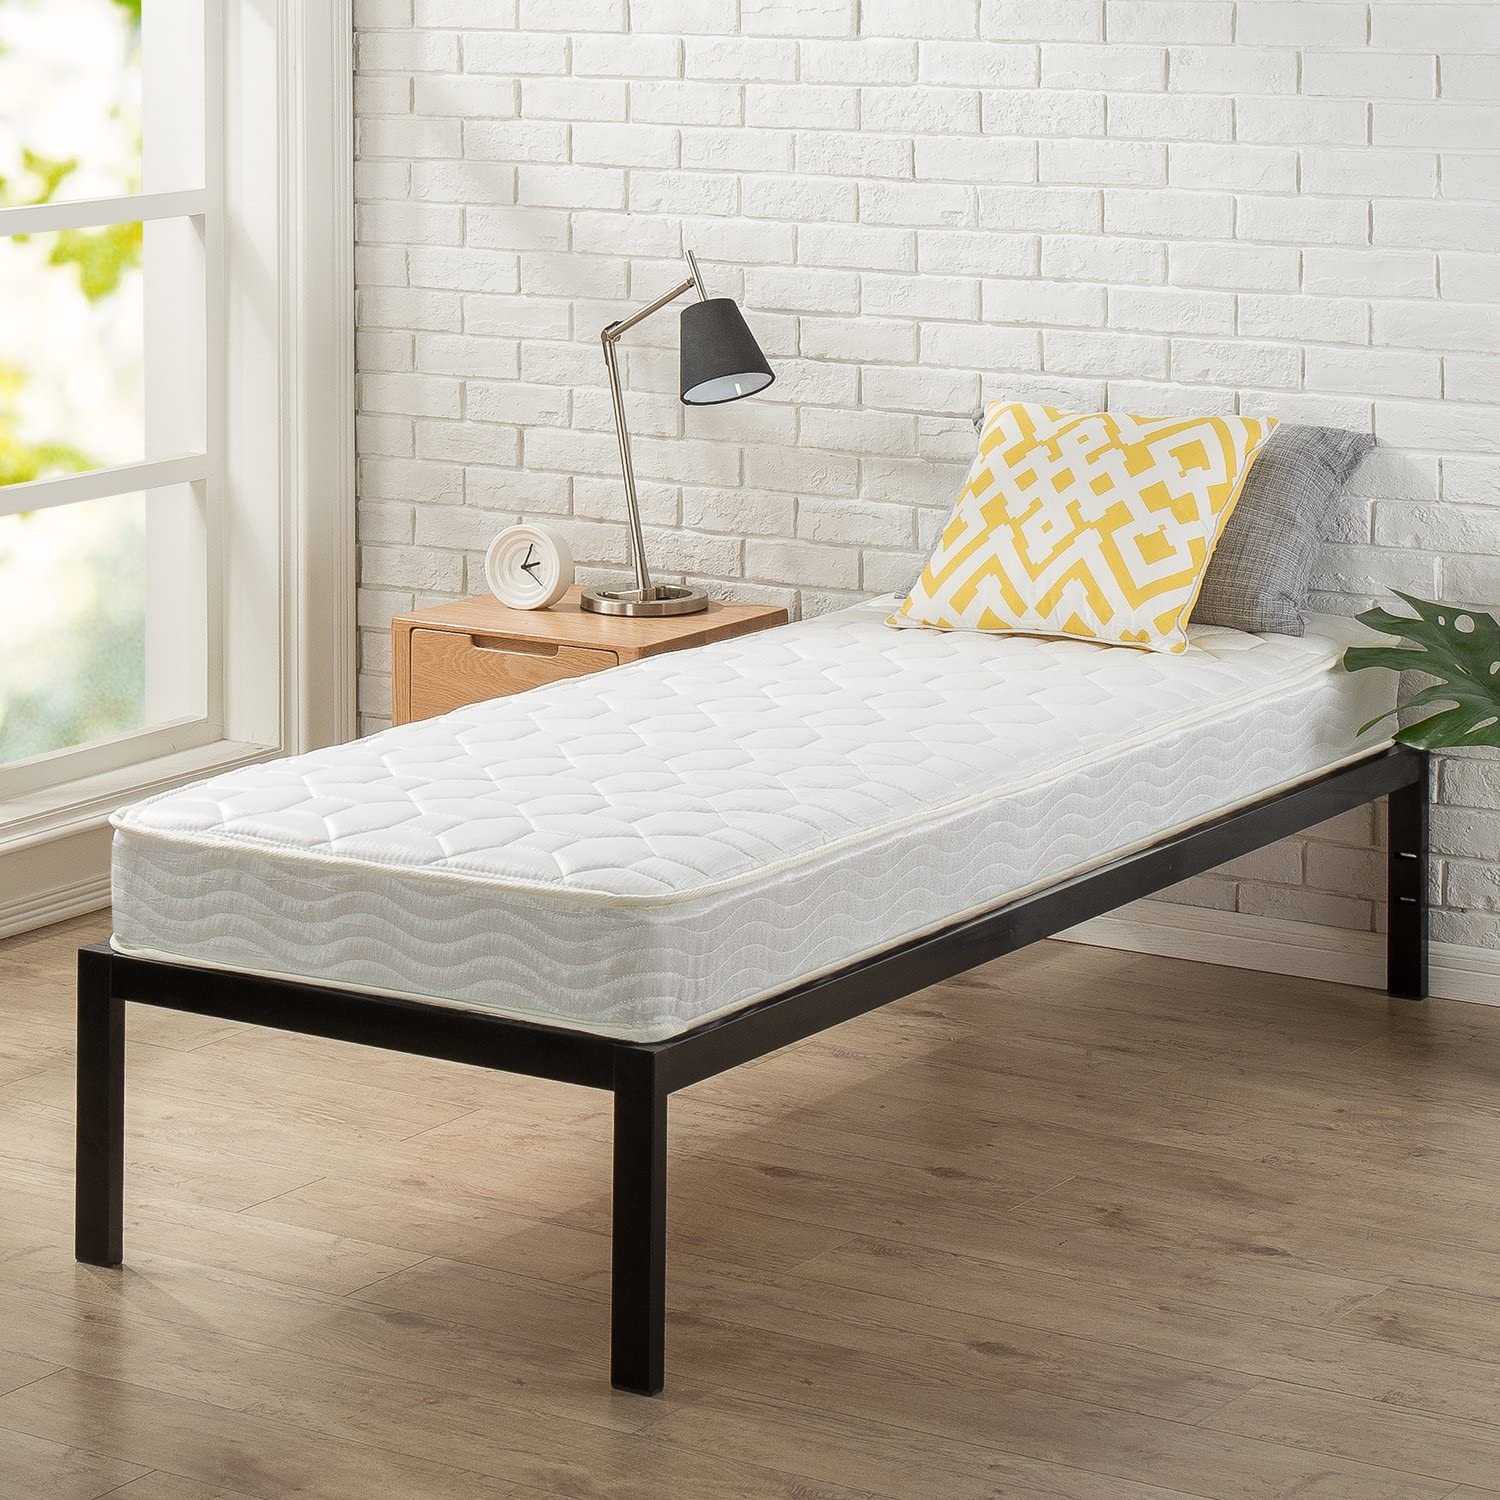 Zinus 6 Inch Twin Narrow Foam and Spring Mattress Review